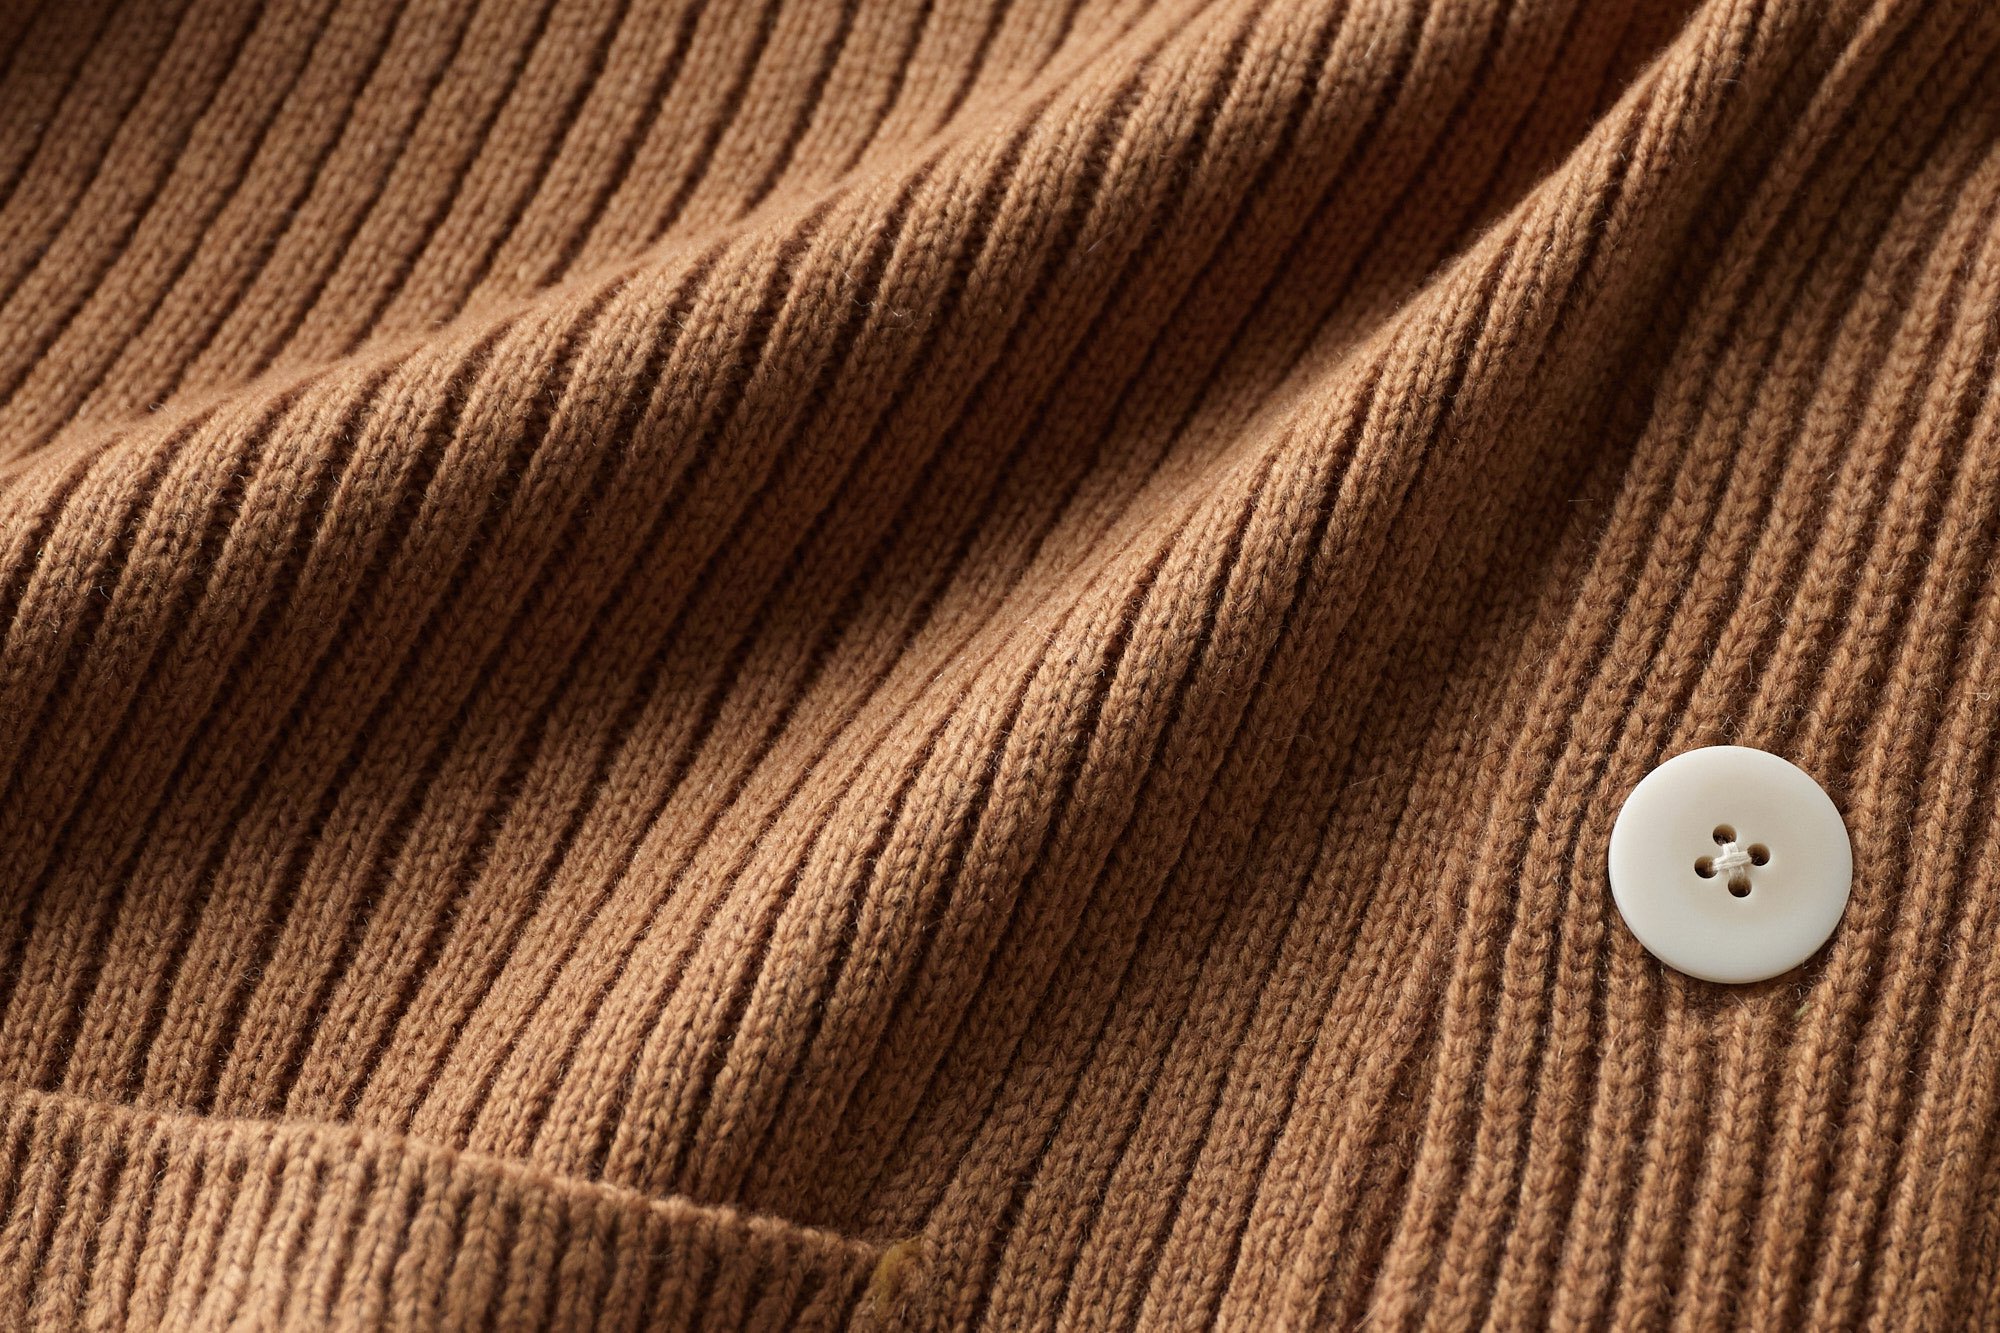 Inswirl WOOL KNIT PULL OVER